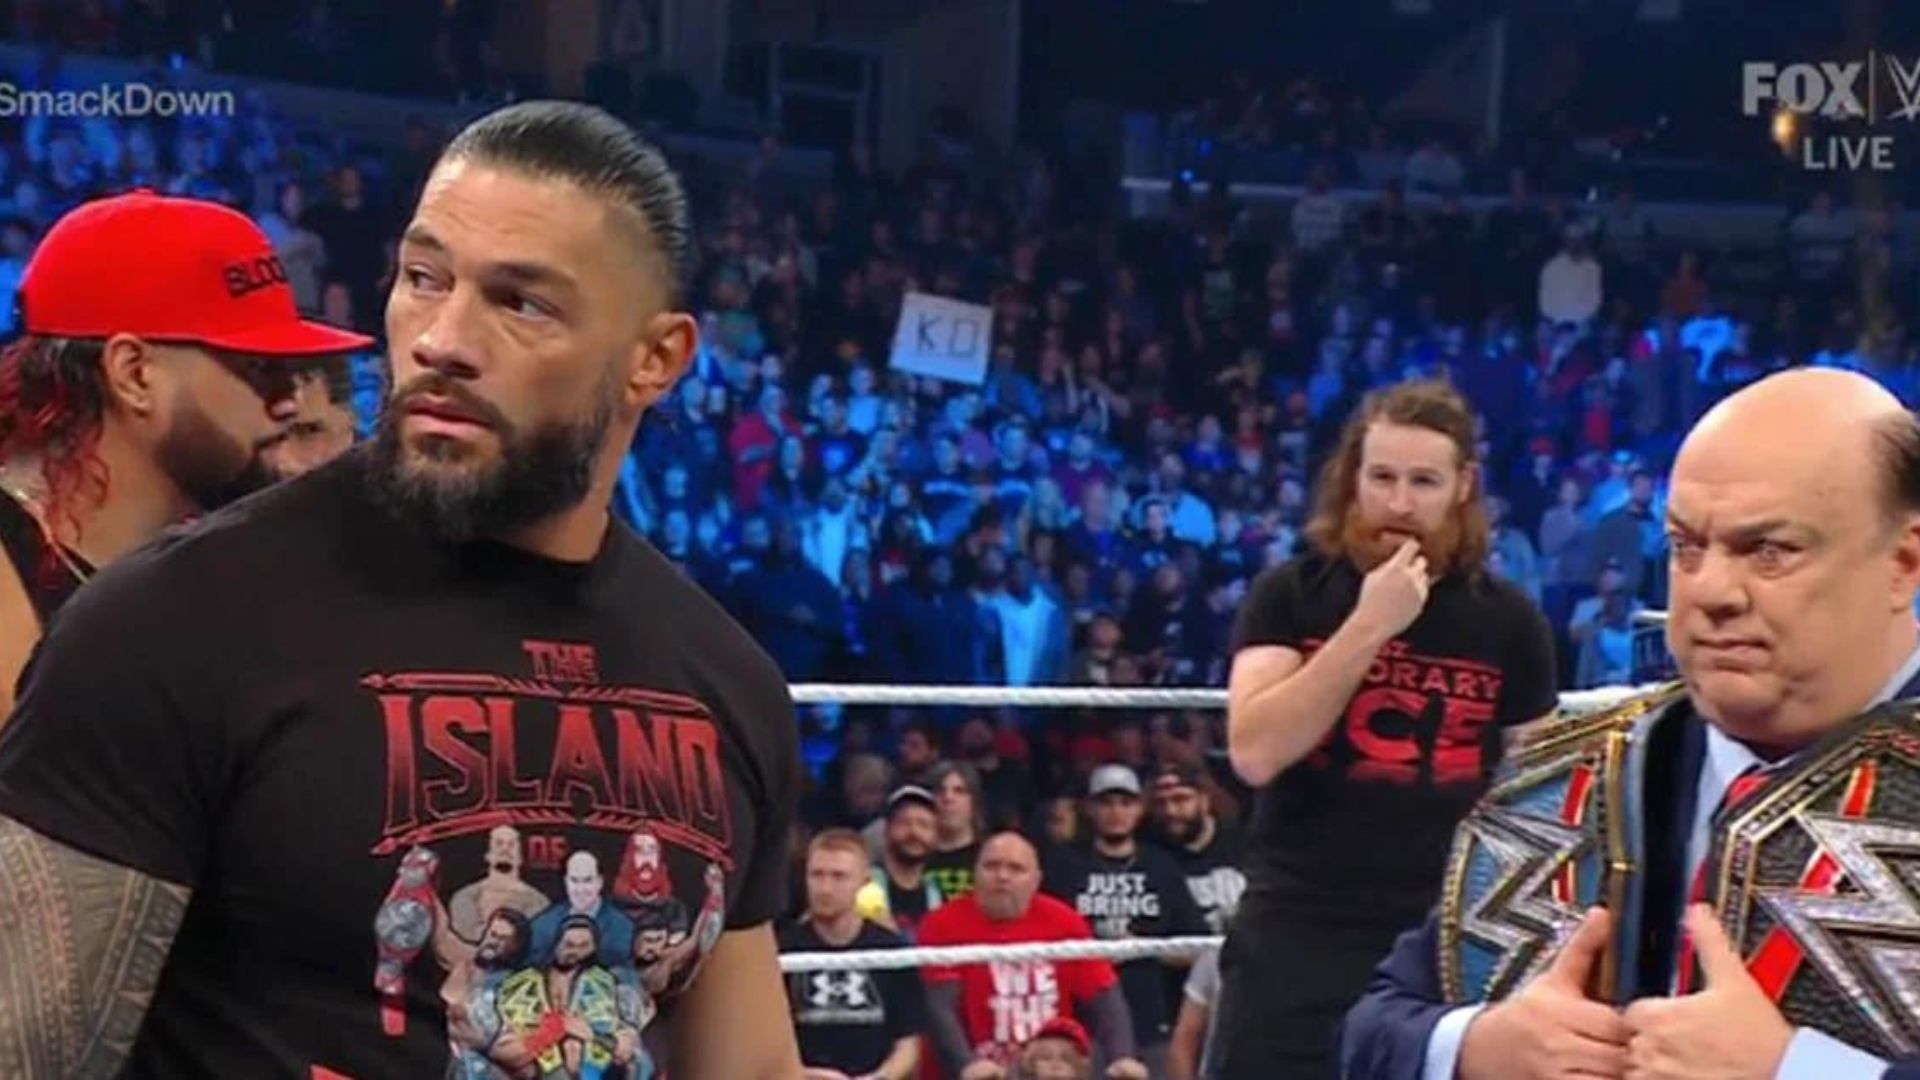 Roman Reigns was furious with Sami Zayn on SmackDown